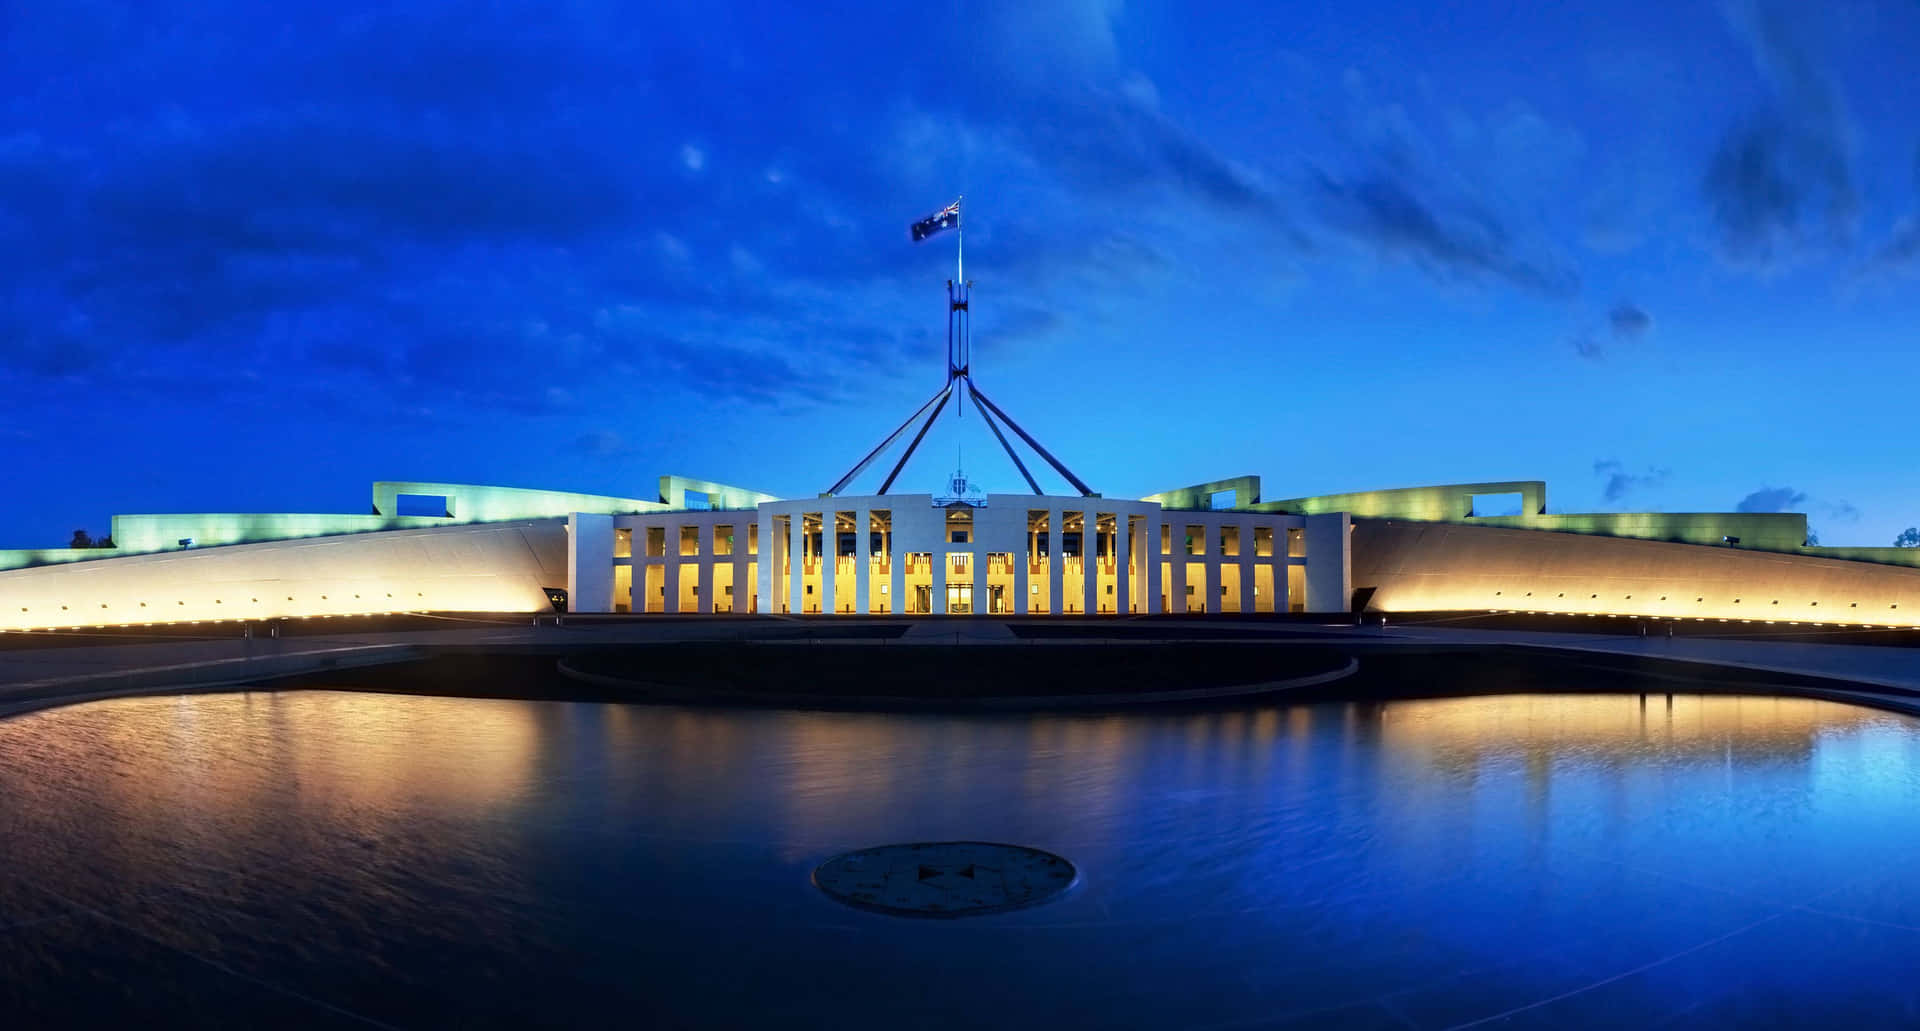 "The Parliament Buildings shine brightly at night in Canberra, Australia." Wallpaper